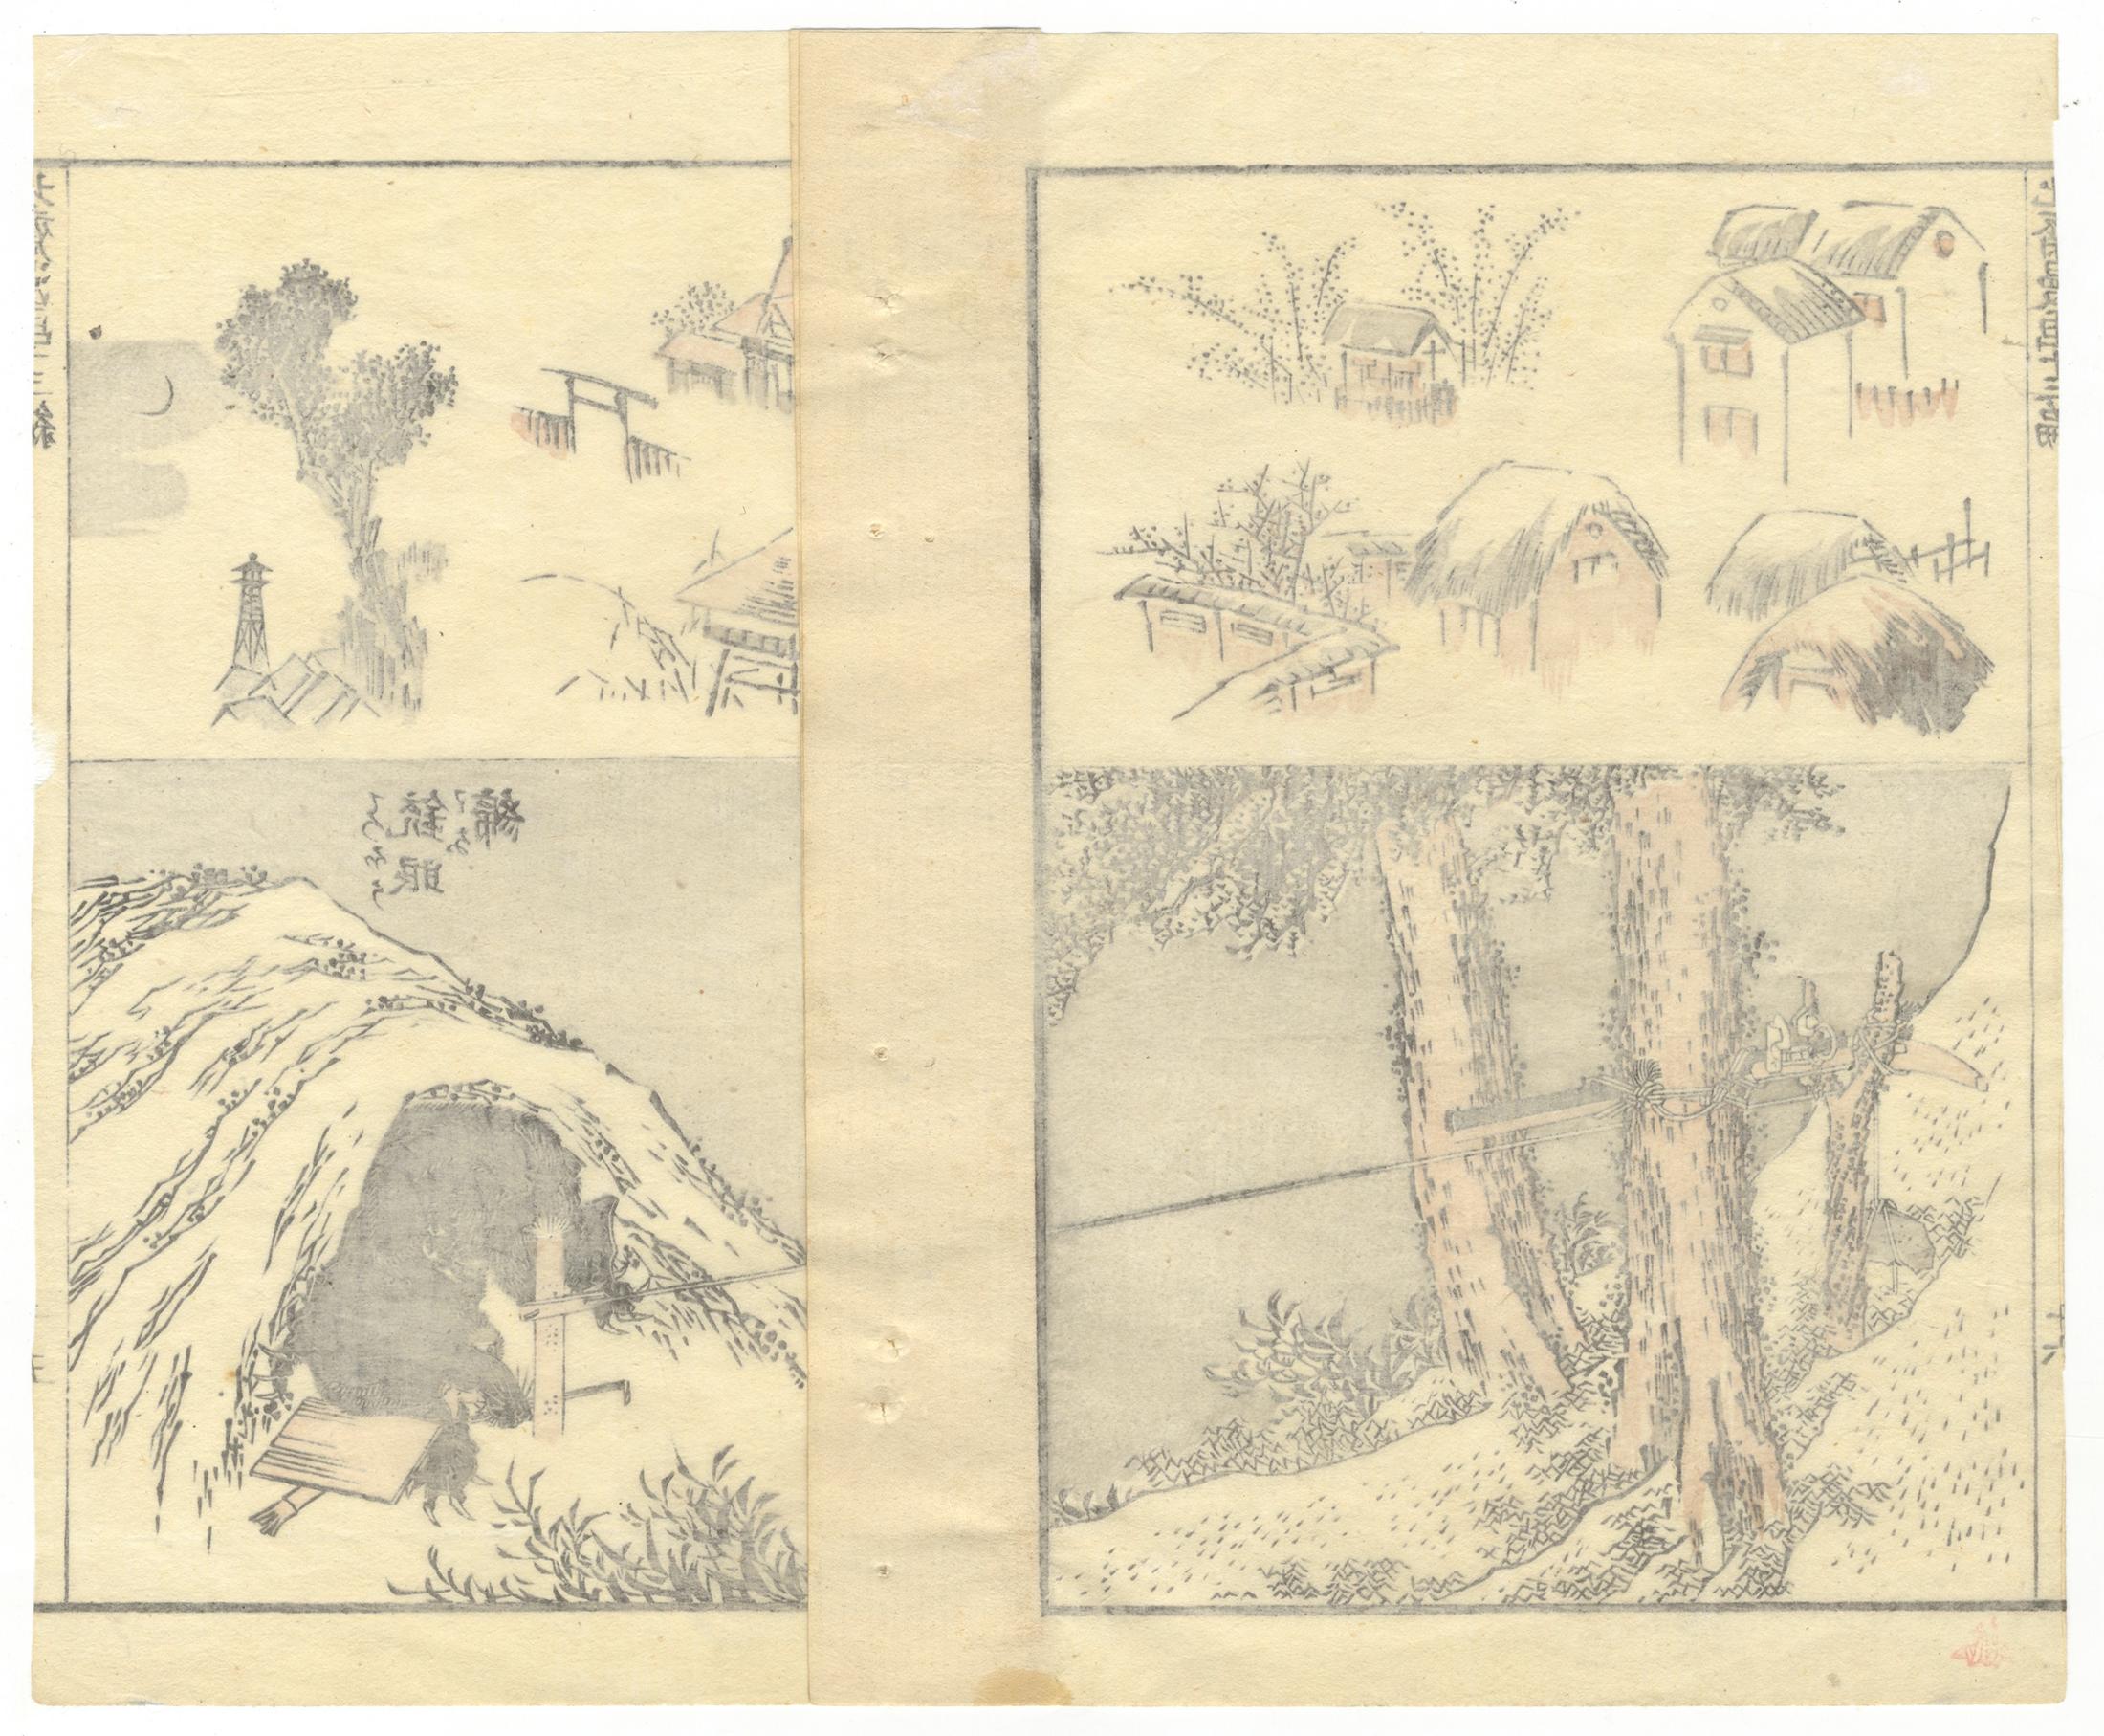 Artist: Katsushika Hokusai
Title: Bear caught in a trap
Series: Hokusai Manga volume 3
Publisher: Toheki-do
Date: 1815
Size: 20.9 x 25.2 cm
Condition report: Small tear on right side of the print. Pages bound together.

This print is from the